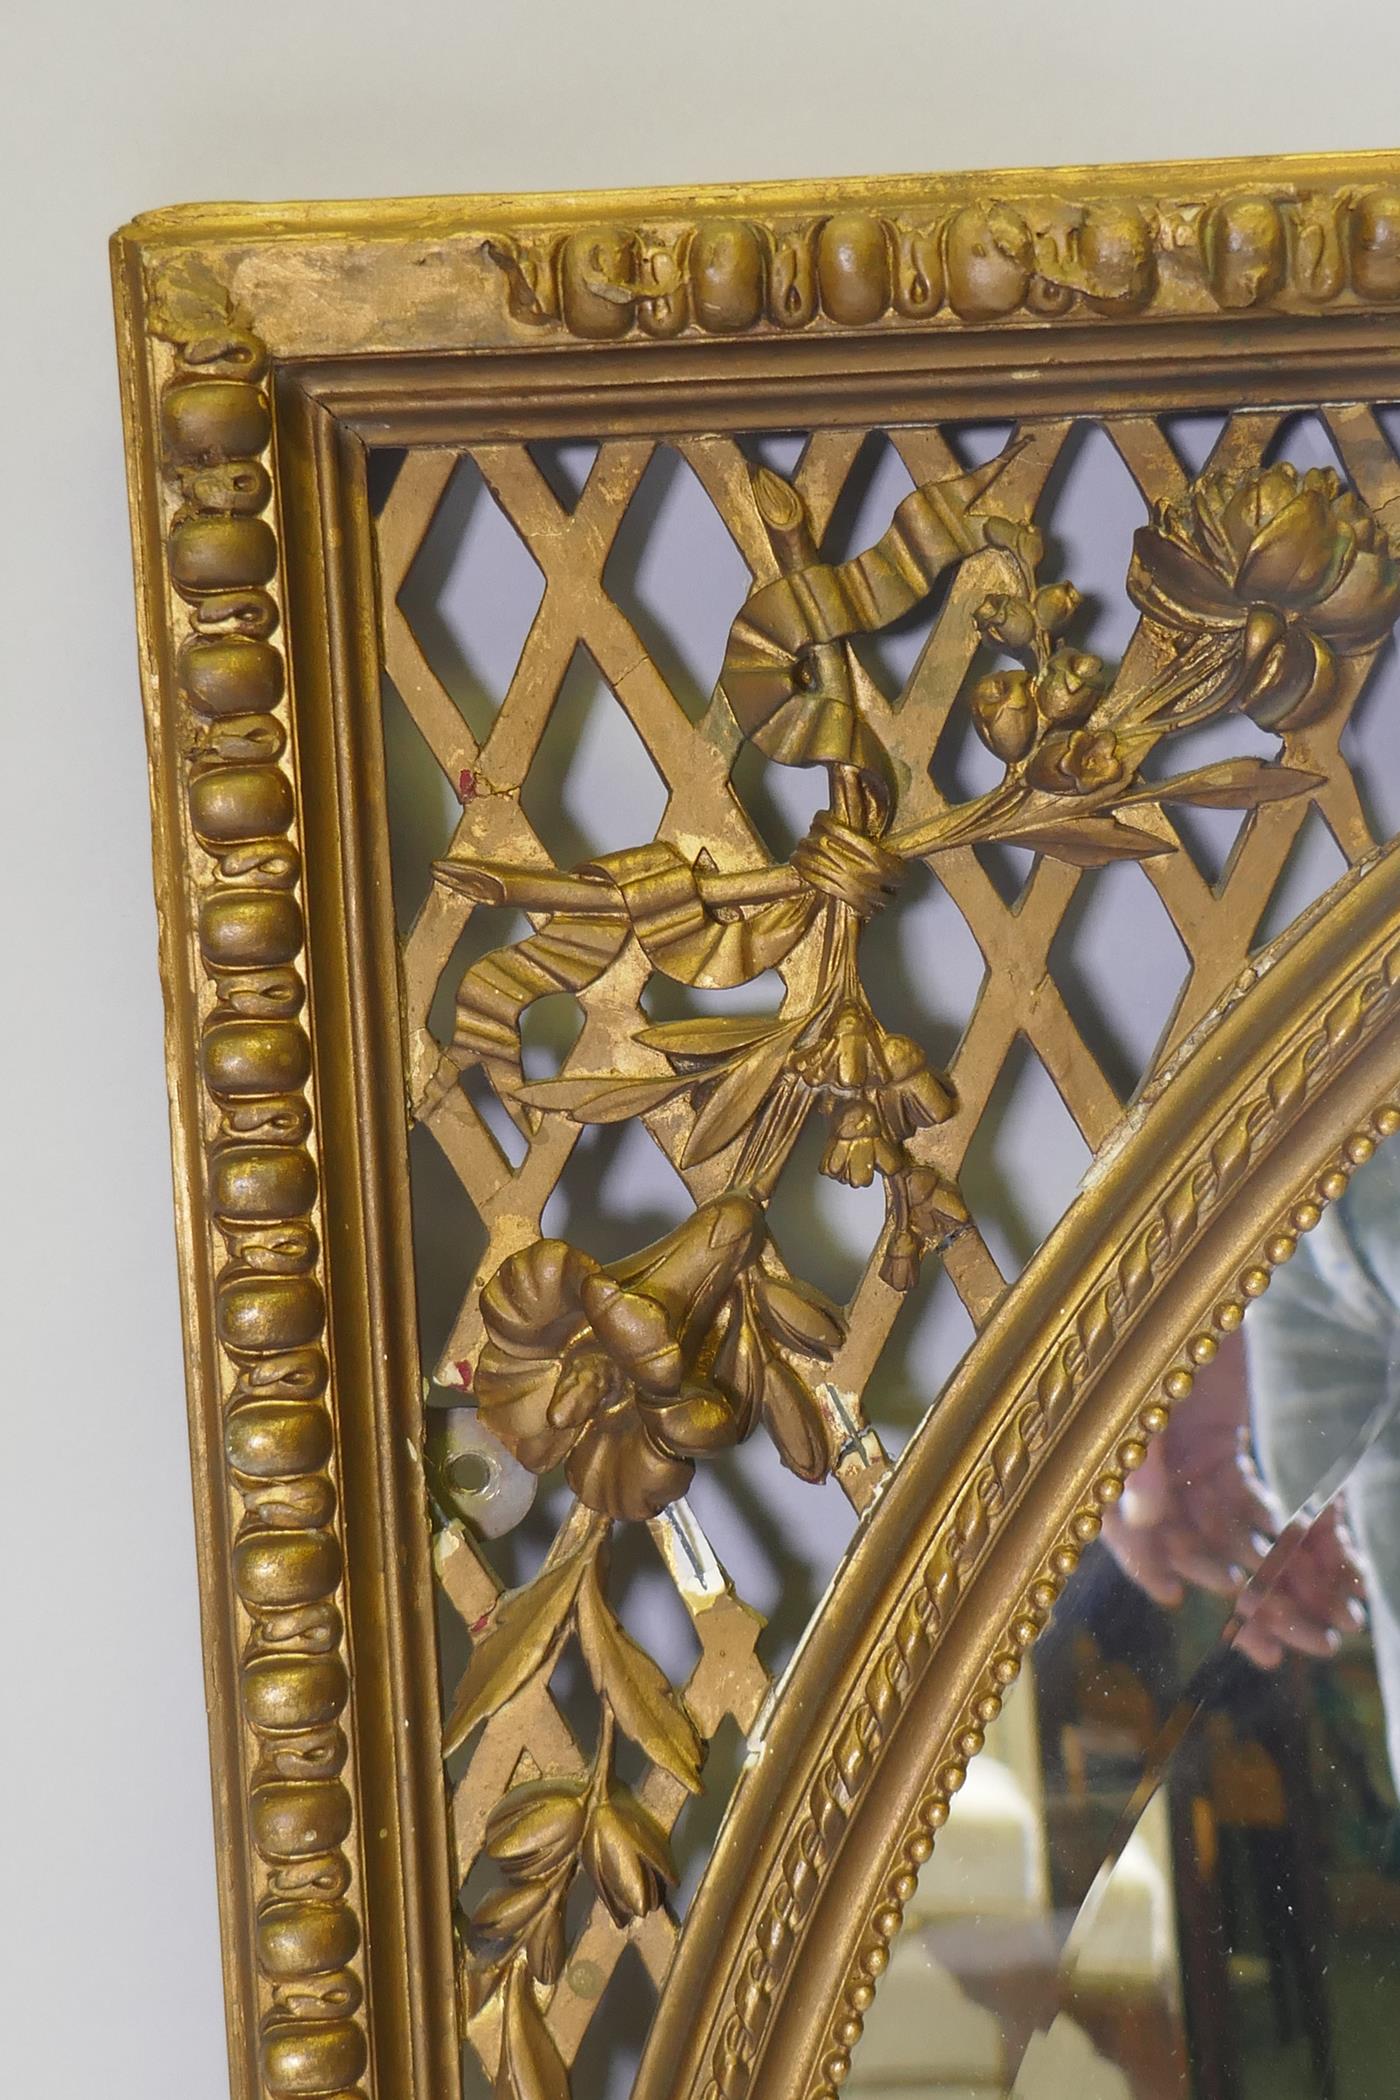 A C19th Continental giltwood and plaster wall mirror, with bevelled glass and pierced spandrels, - Image 2 of 4